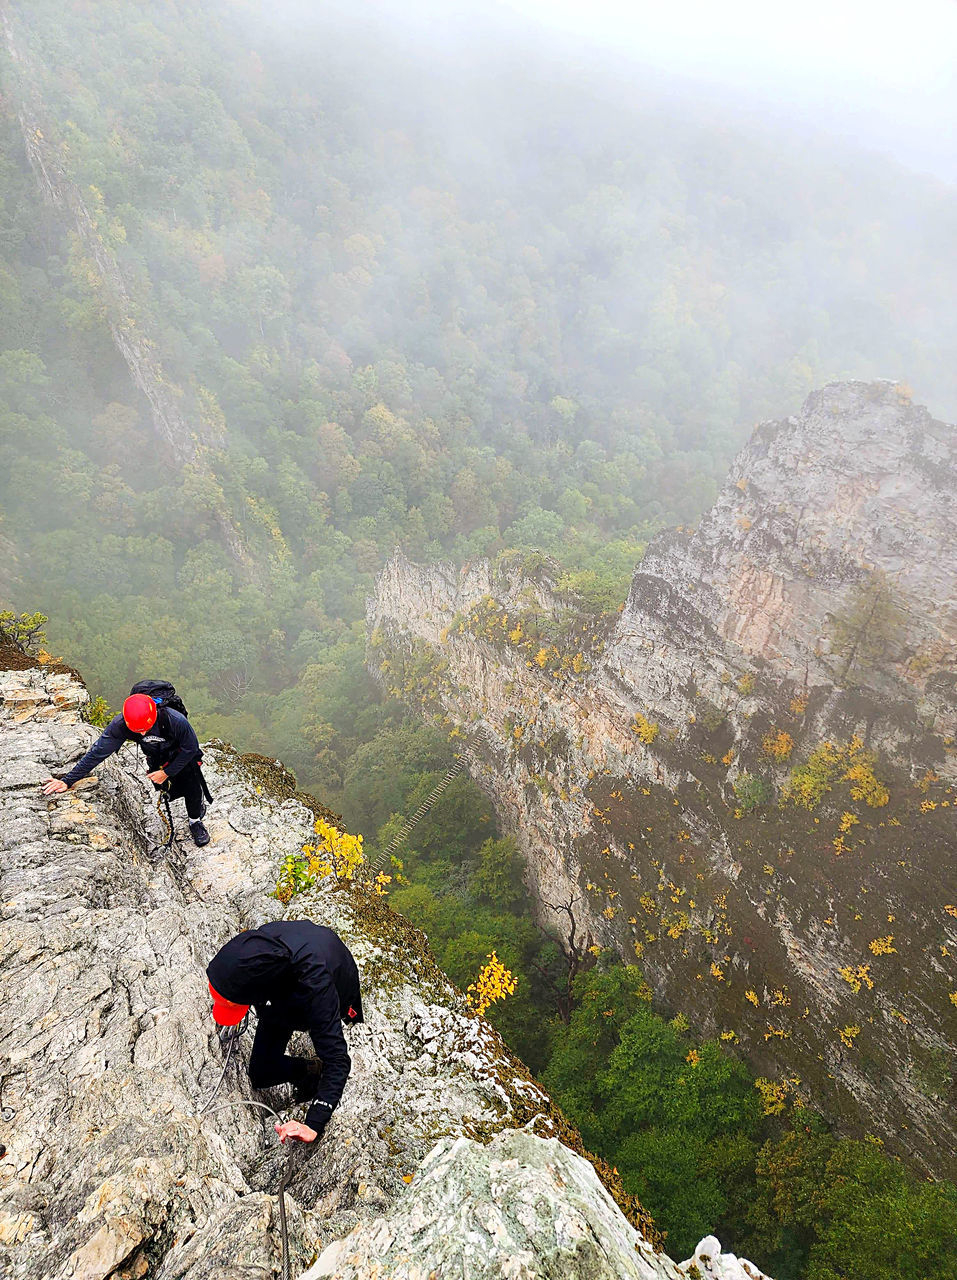 mountain, activity, adventure, leisure activity, rock, nature, climbing, extreme sports, sports, hiking, ridge, scenics - nature, beauty in nature, high angle view, fog, environment, adult, men, landscape, land, travel, mountain climbing, mountaineering, day, lifestyles, full length, mountain range, outdoors, recreation, walking, rock climbing, backpack, one person, travel destinations, risk, non-urban scene, holiday, vacation, trip, rear view, challenge, plant, communication, exploration, person, courage, determination, tranquil scene, tourism, sign, rock formation, motion, warning sign